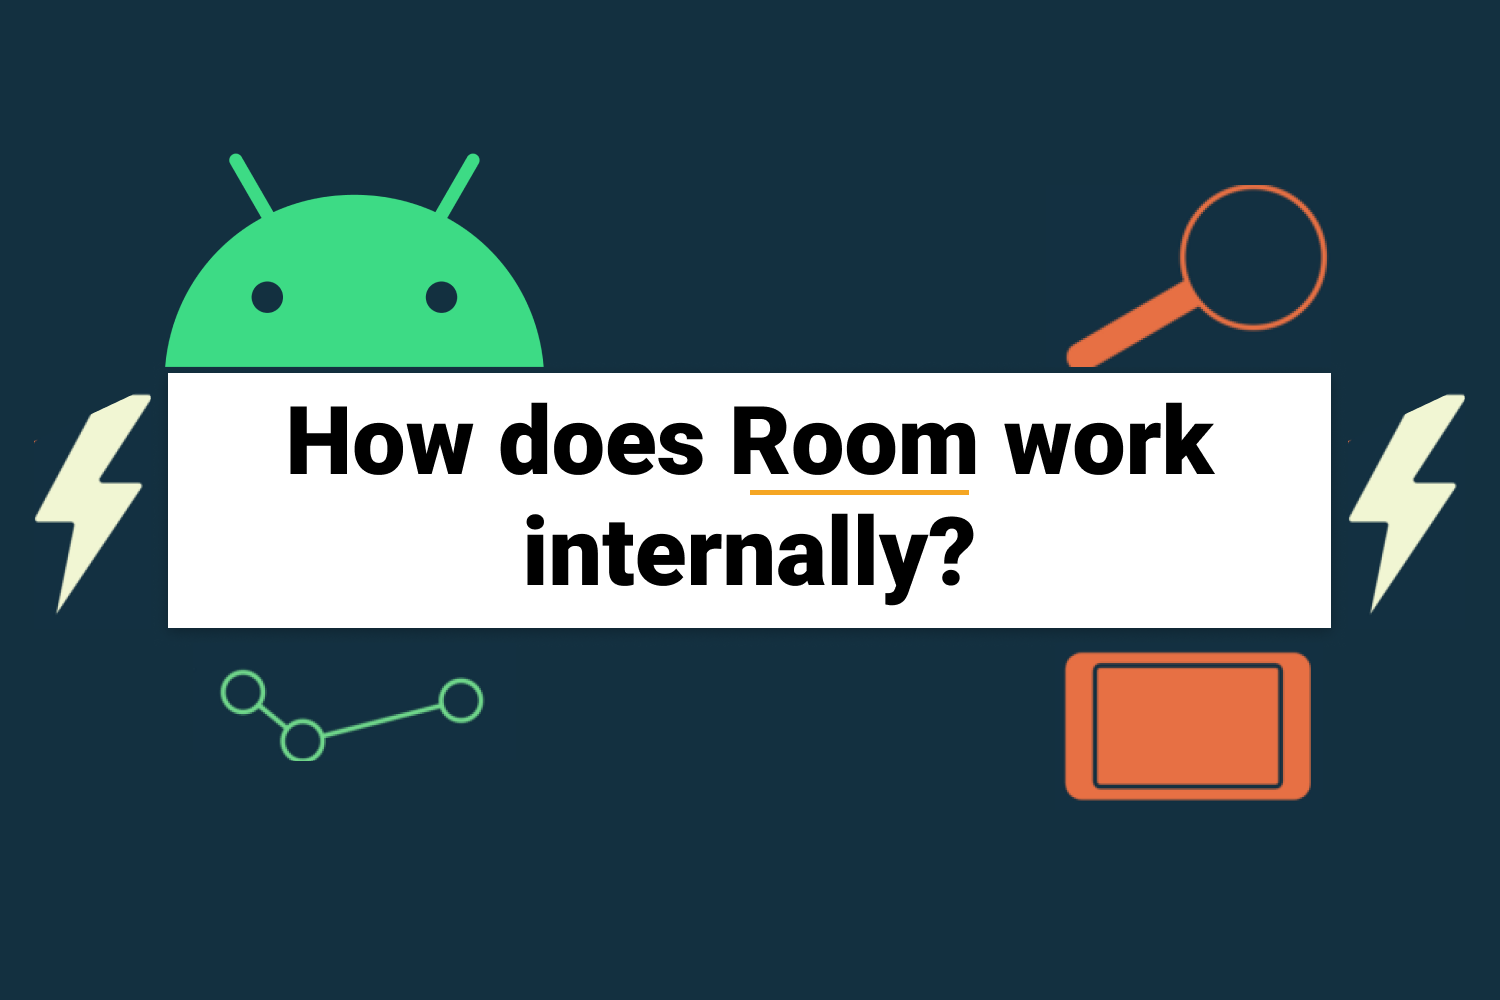 How does Room work internally?